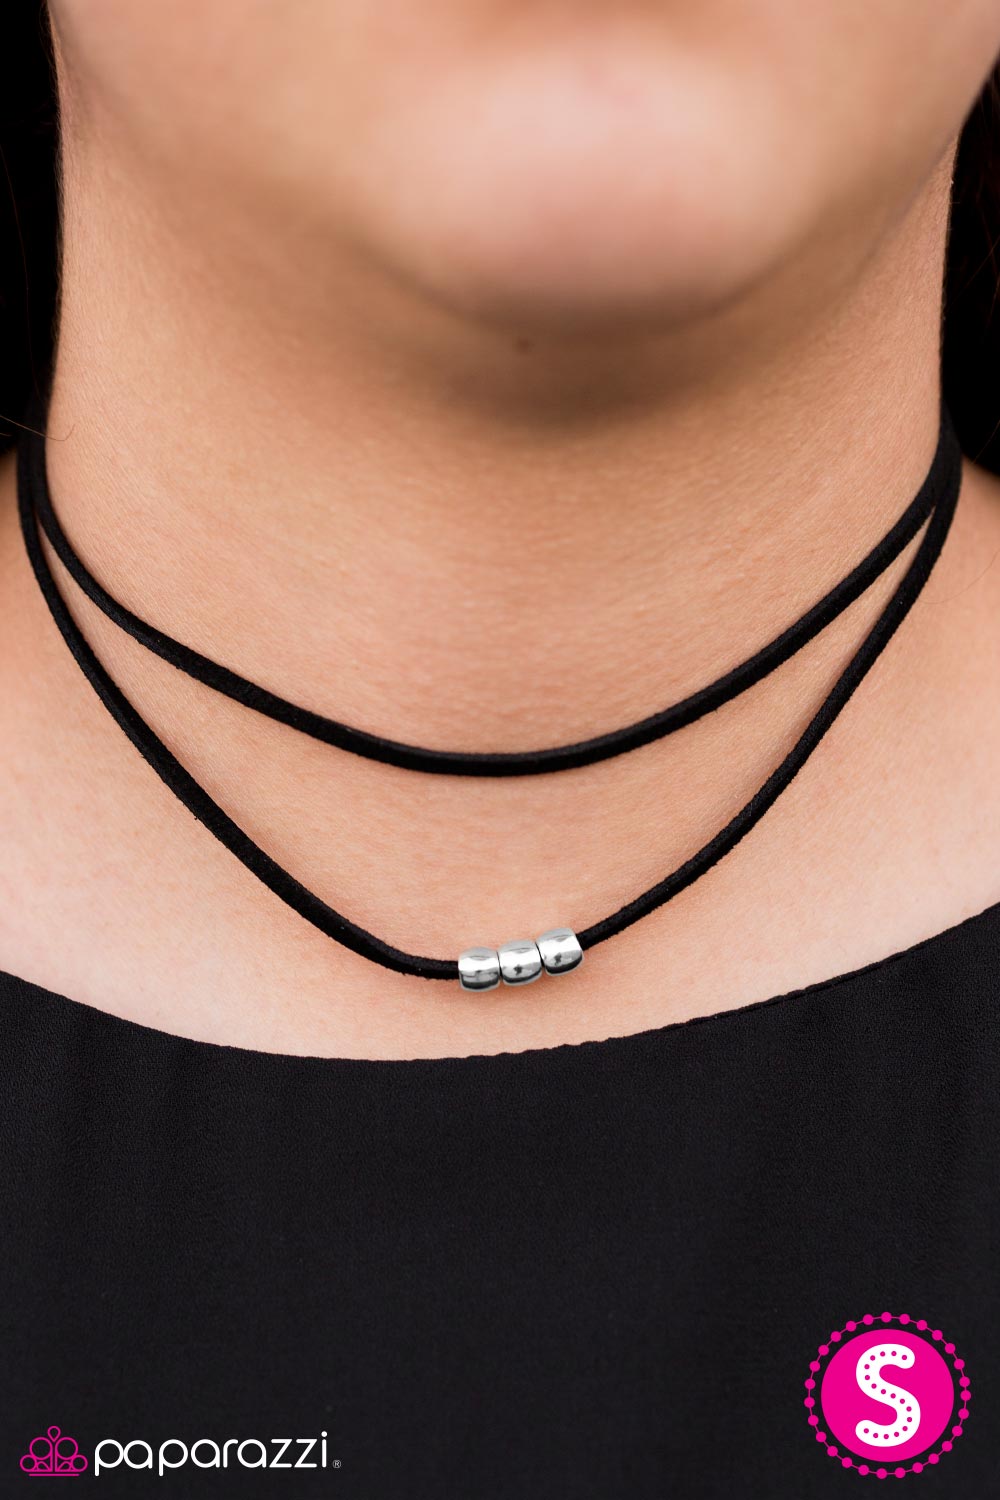 Out Of Bounds - Choker - Paparazzi necklace